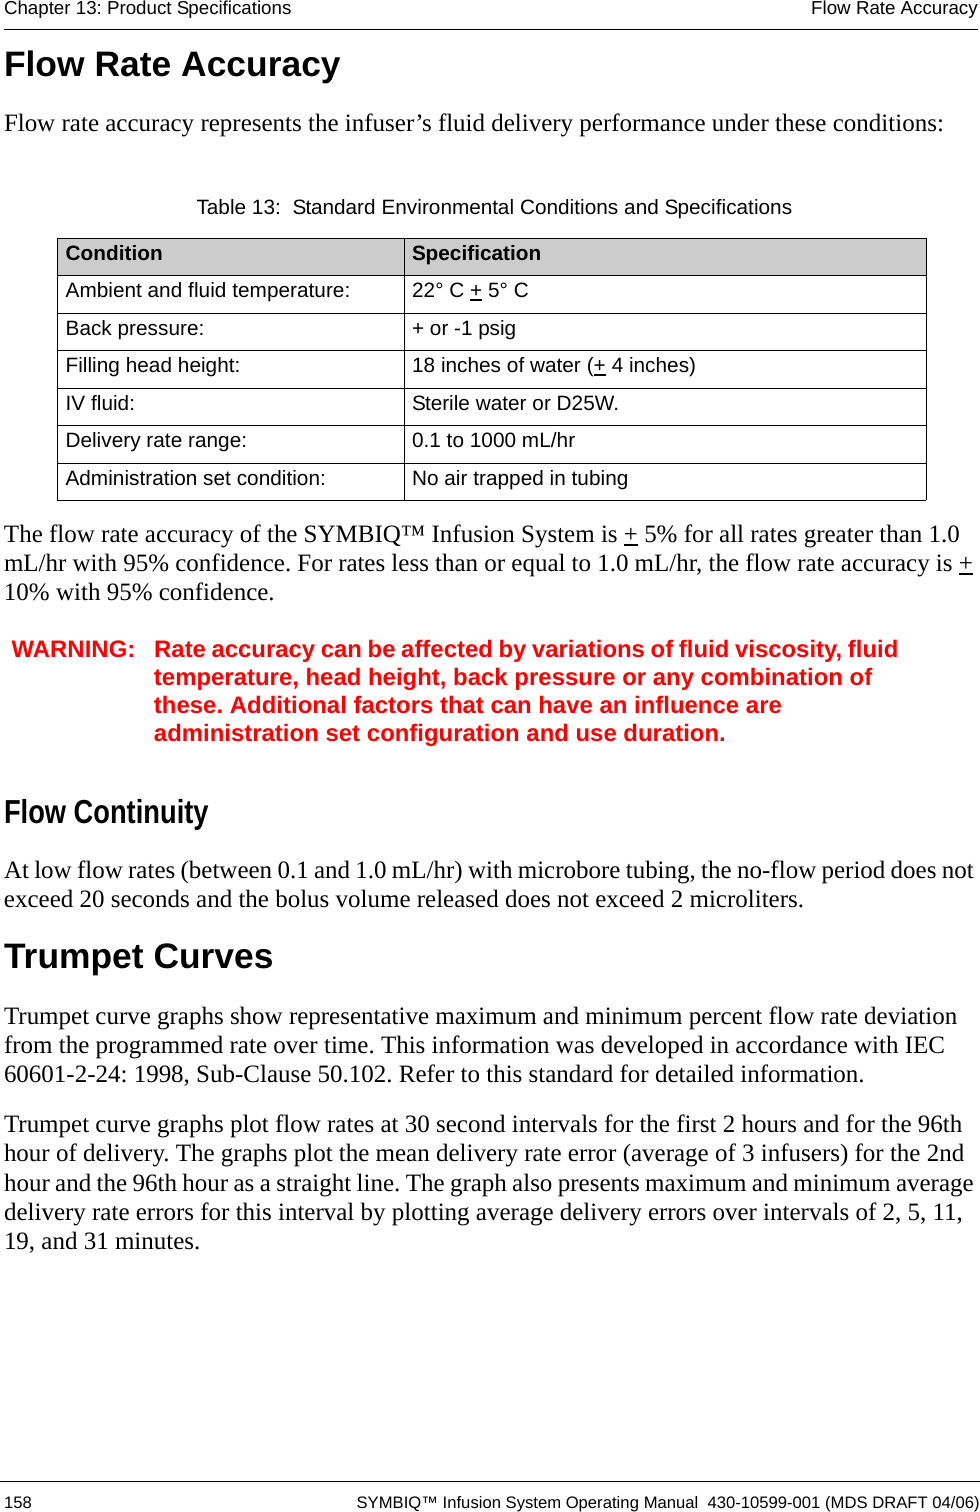  158 SYMBIQ™ Infusion System Operating Manual  430-10599-001 (MDS DRAFT 04/06)Chapter 13: Product Specifications Flow Rate AccuracyFlow Rate AccuracyFlow rate accuracy represents the infuser’s fluid delivery performance under these conditions:The flow rate accuracy of the SYMBIQ™ Infusion System is + 5% for all rates greater than 1.0 mL/hr with 95% confidence. For rates less than or equal to 1.0 mL/hr, the flow rate accuracy is + 10% with 95% confidence.WARNING: Rate accuracy can be affected by variations of fluid viscosity, fluid temperature, head height, back pressure or any combination of these. Additional factors that can have an influence are administration set configuration and use duration.Flow ContinuityAt low flow rates (between 0.1 and 1.0 mL/hr) with microbore tubing, the no-flow period does not exceed 20 seconds and the bolus volume released does not exceed 2 microliters.Trumpet CurvesTrumpet curve graphs show representative maximum and minimum percent flow rate deviation from the programmed rate over time. This information was developed in accordance with IEC 60601-2-24: 1998, Sub-Clause 50.102. Refer to this standard for detailed information.Trumpet curve graphs plot flow rates at 30 second intervals for the first 2 hours and for the 96th hour of delivery. The graphs plot the mean delivery rate error (average of 3 infusers) for the 2nd hour and the 96th hour as a straight line. The graph also presents maximum and minimum average delivery rate errors for this interval by plotting average delivery errors over intervals of 2, 5, 11, 19, and 31 minutes. Table 13:  Standard Environmental Conditions and SpecificationsCondition SpecificationAmbient and fluid temperature: 22° C + 5° CBack pressure: + or -1 psigFilling head height: 18 inches of water (+ 4 inches)IV fluid: Sterile water or D25W.Delivery rate range: 0.1 to 1000 mL/hrAdministration set condition: No air trapped in tubing